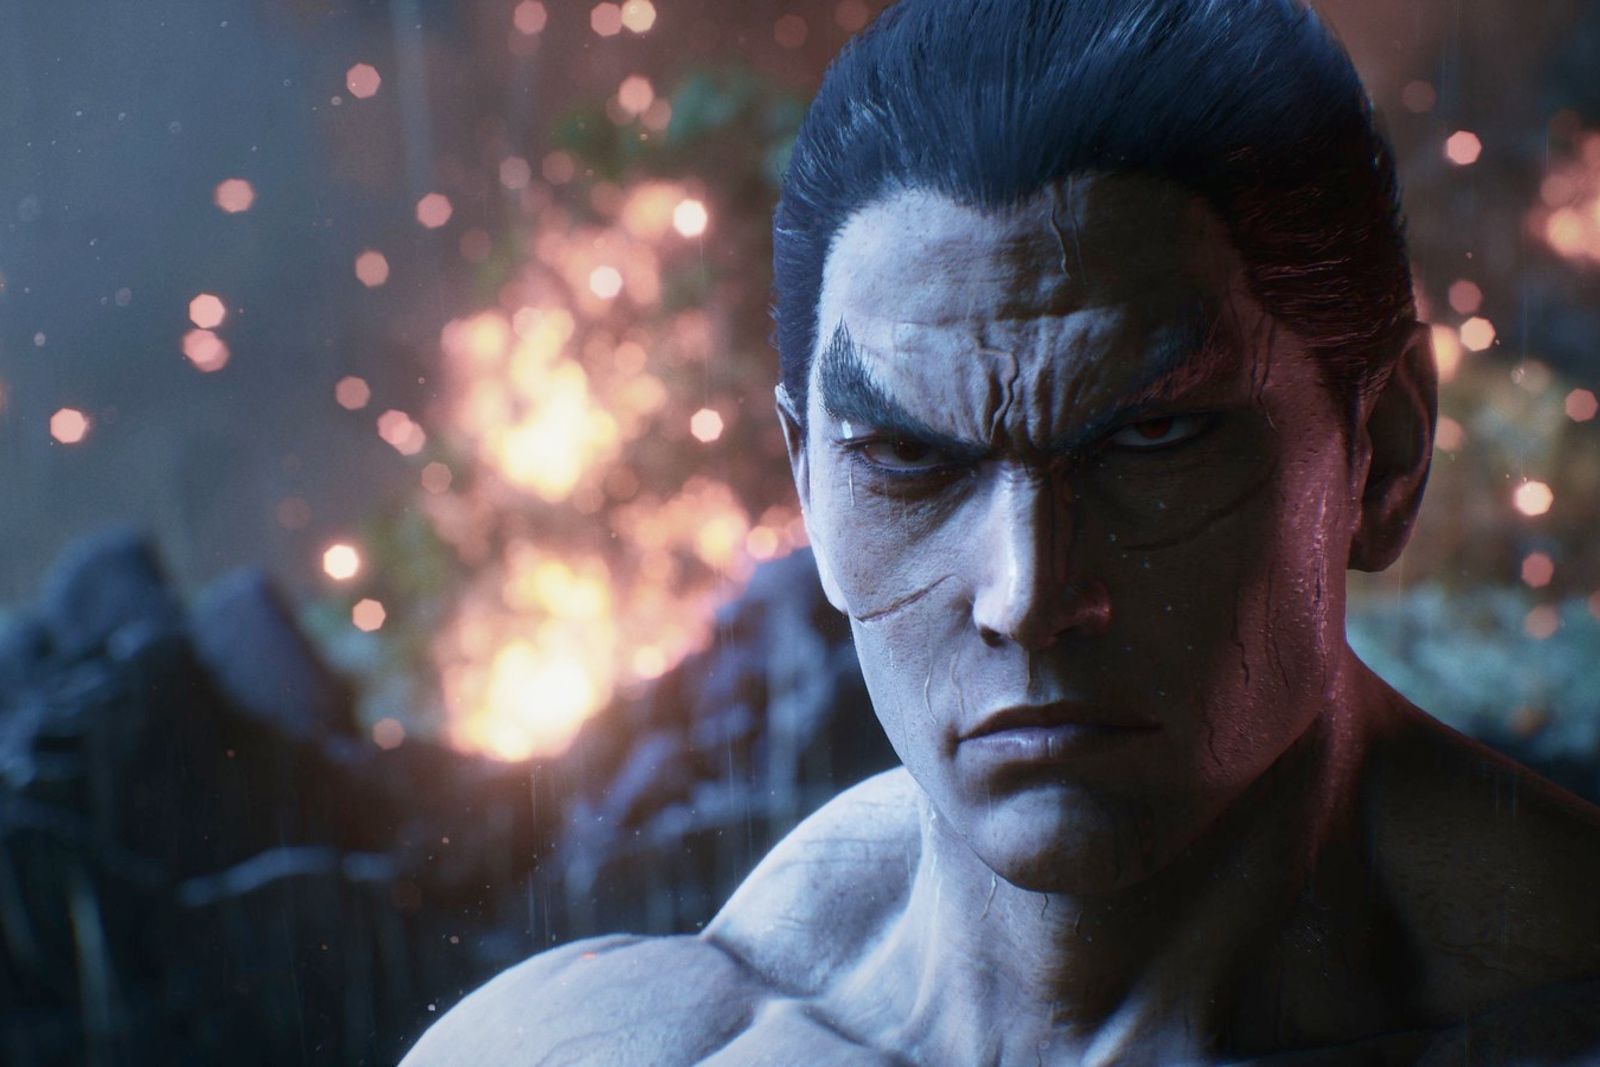 Tekken 8: Everything we know – Release date, trailers, character